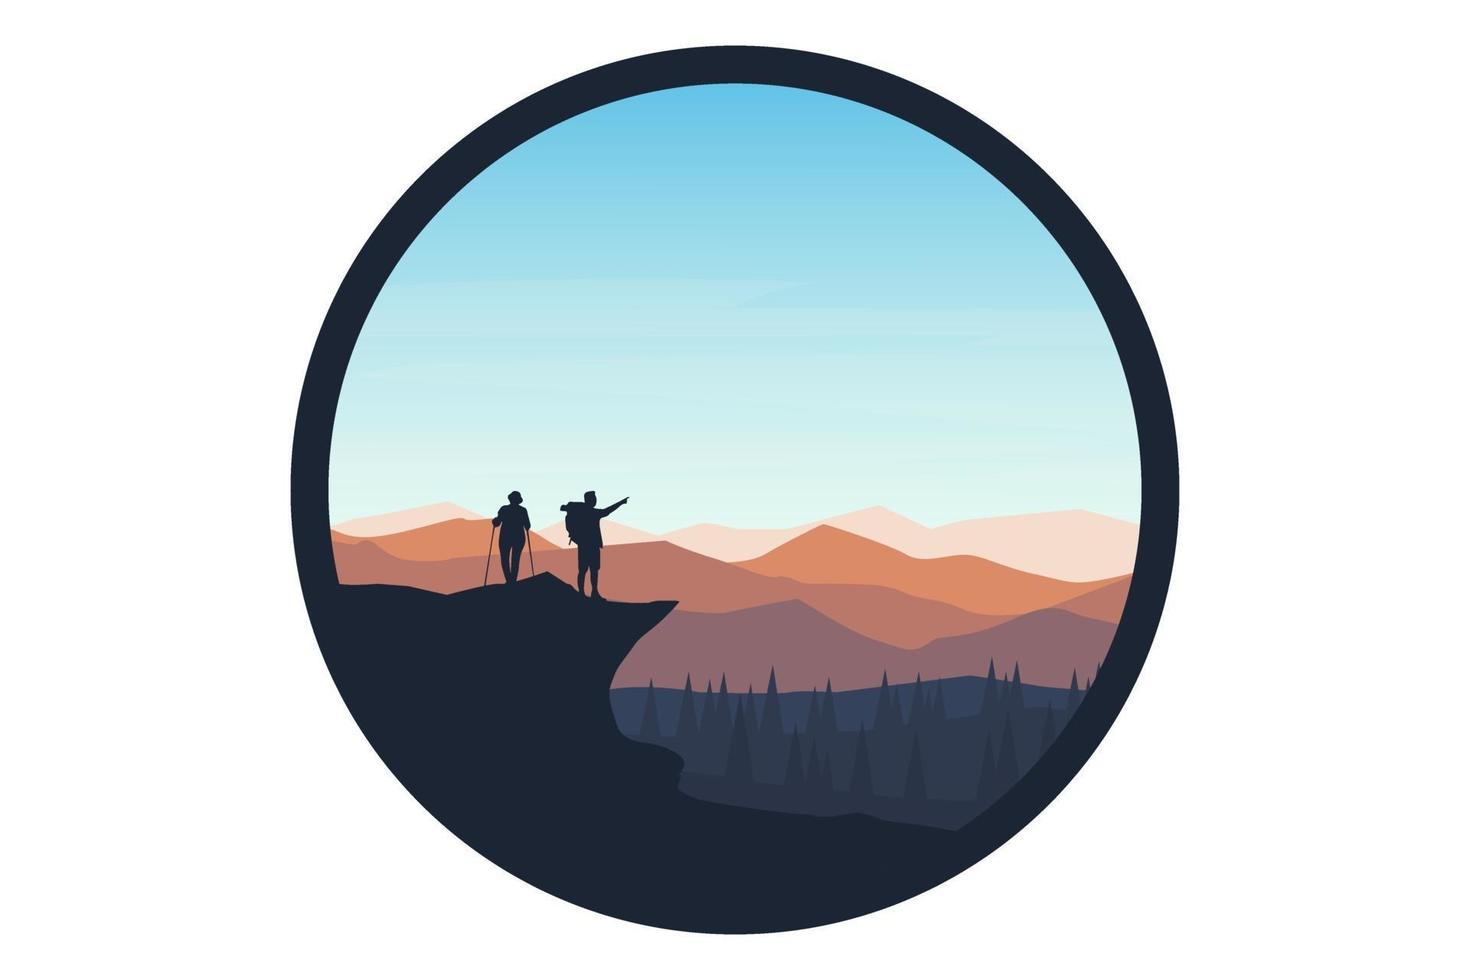 T-shirt mountain climbers see the atmosphere landscape vector